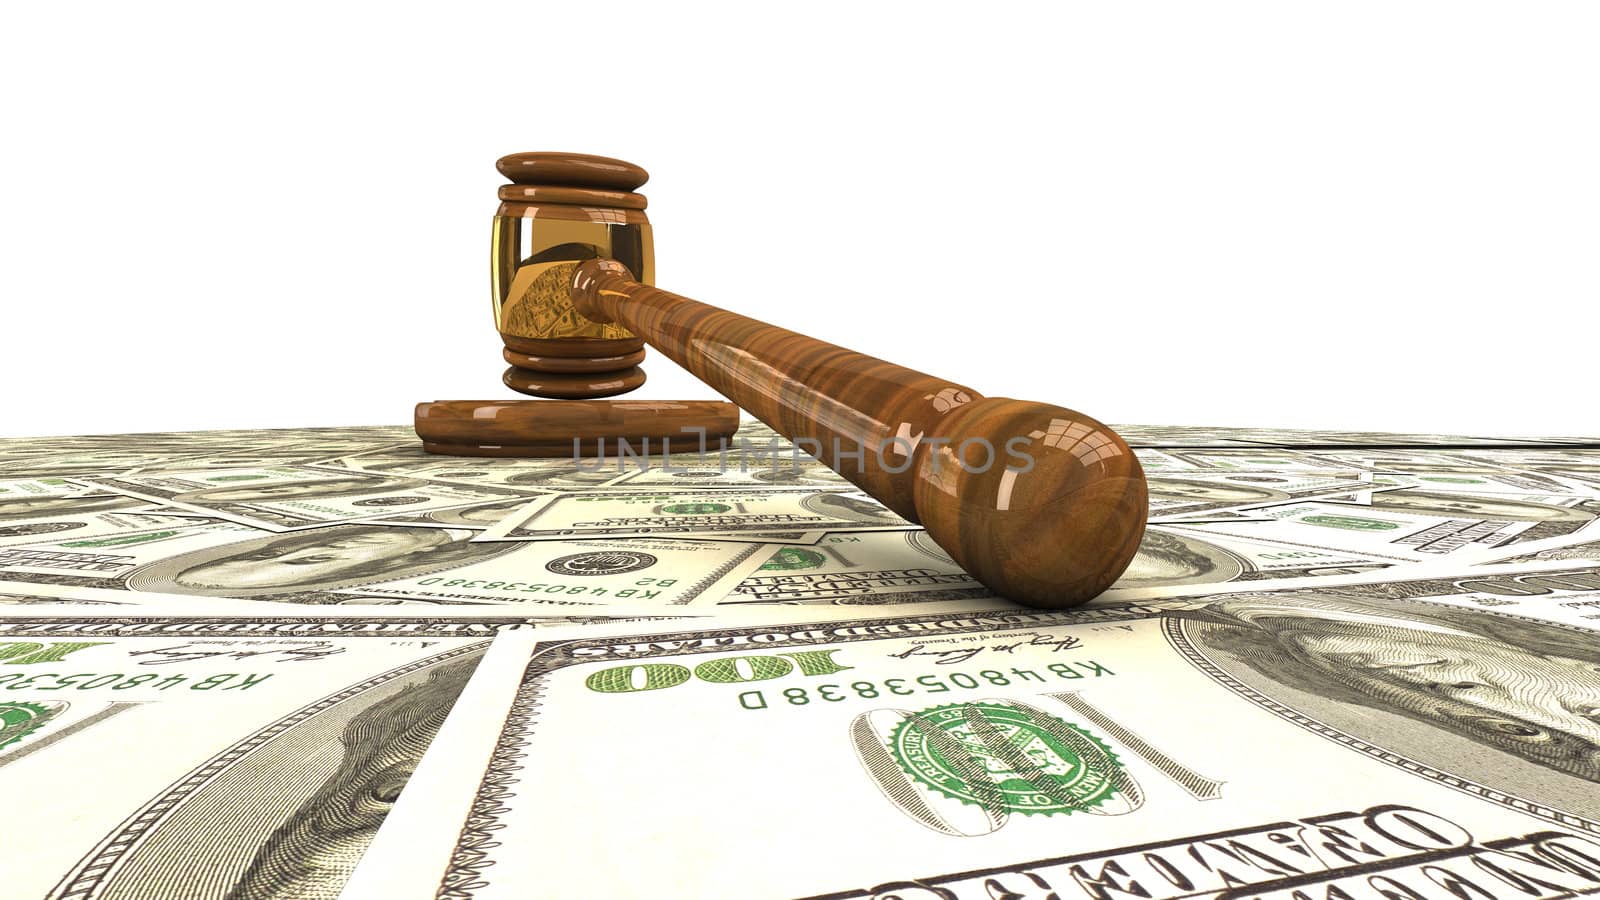 Gavel standing on a dollars. Wide angle conceptual illustration